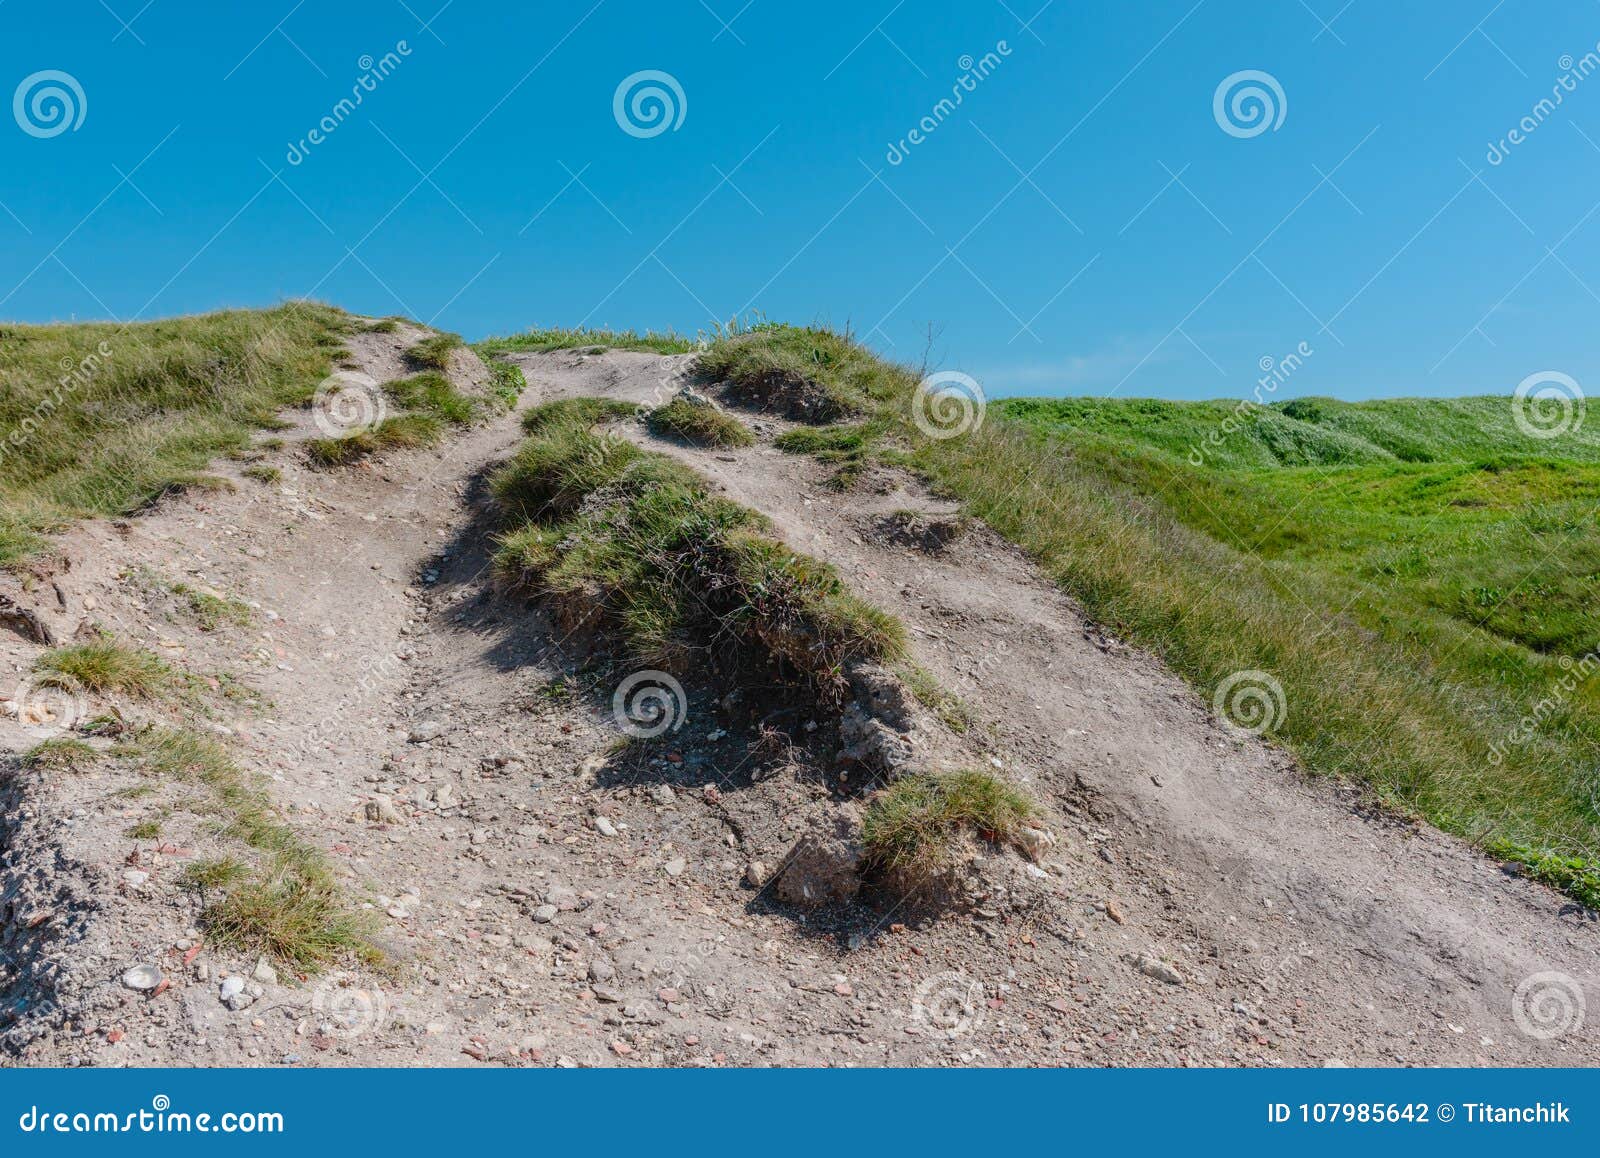 Summer Landscape Path On Hill National Stock Photo 793840744